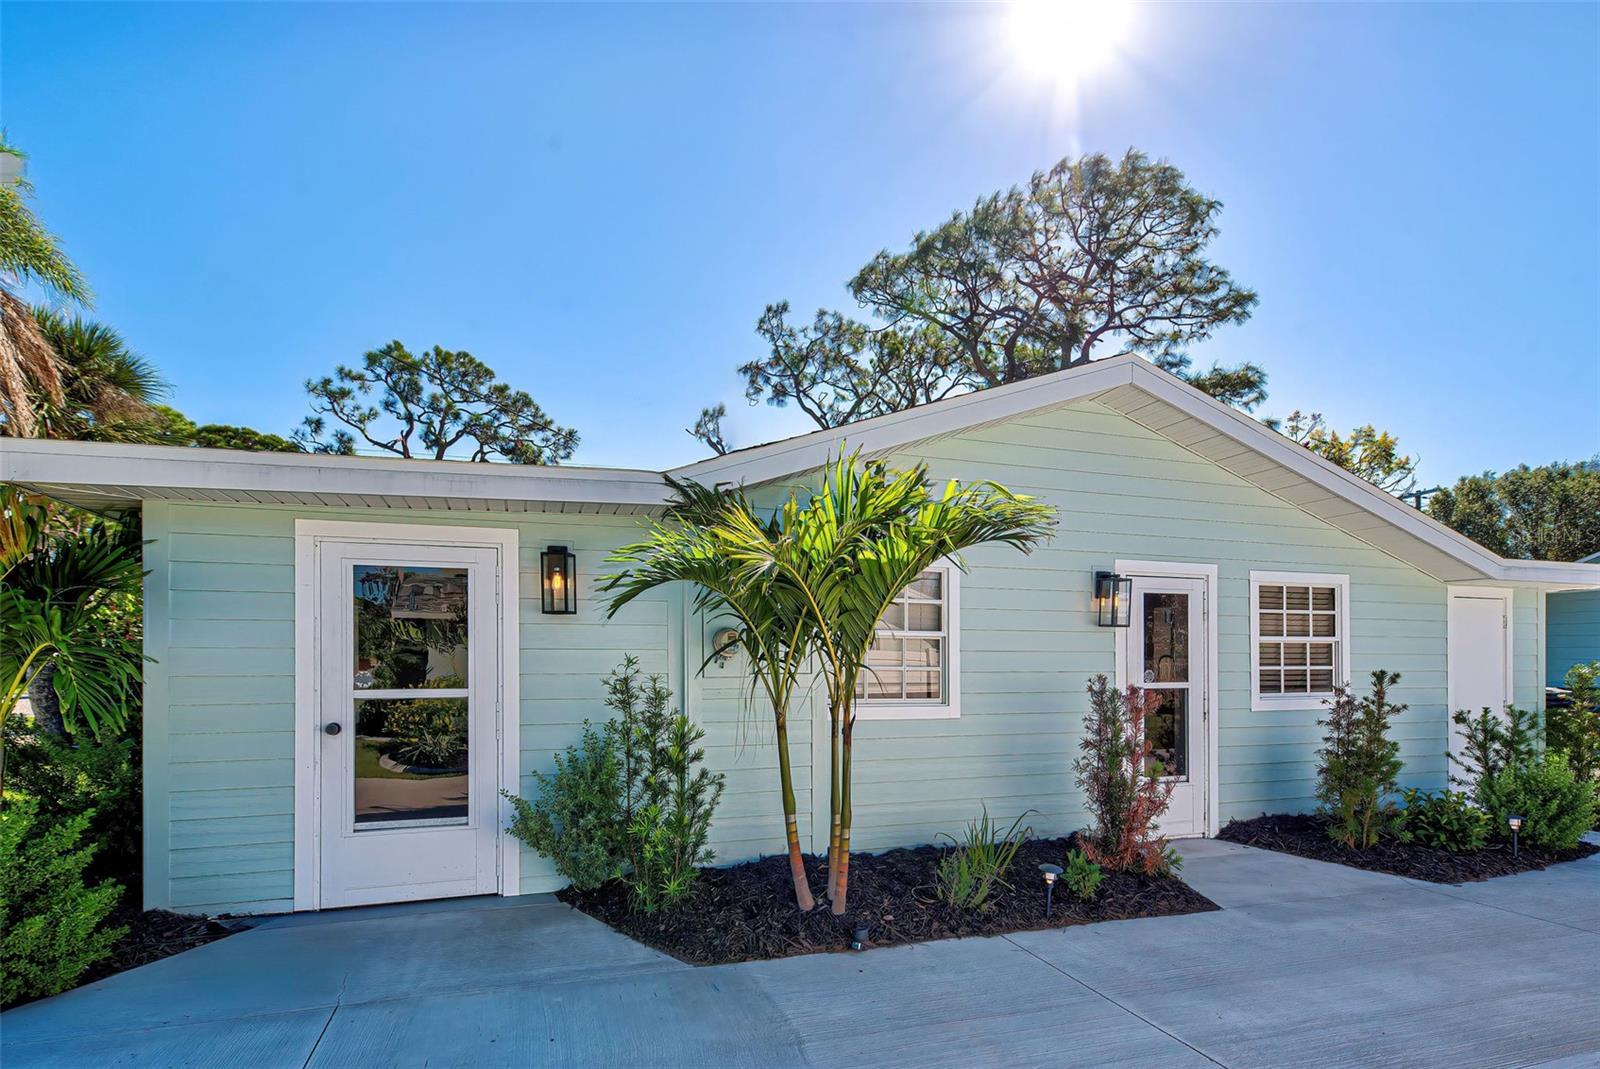 Photo one of 415 Yale St Englewood FL 34223 | MLS D6132844